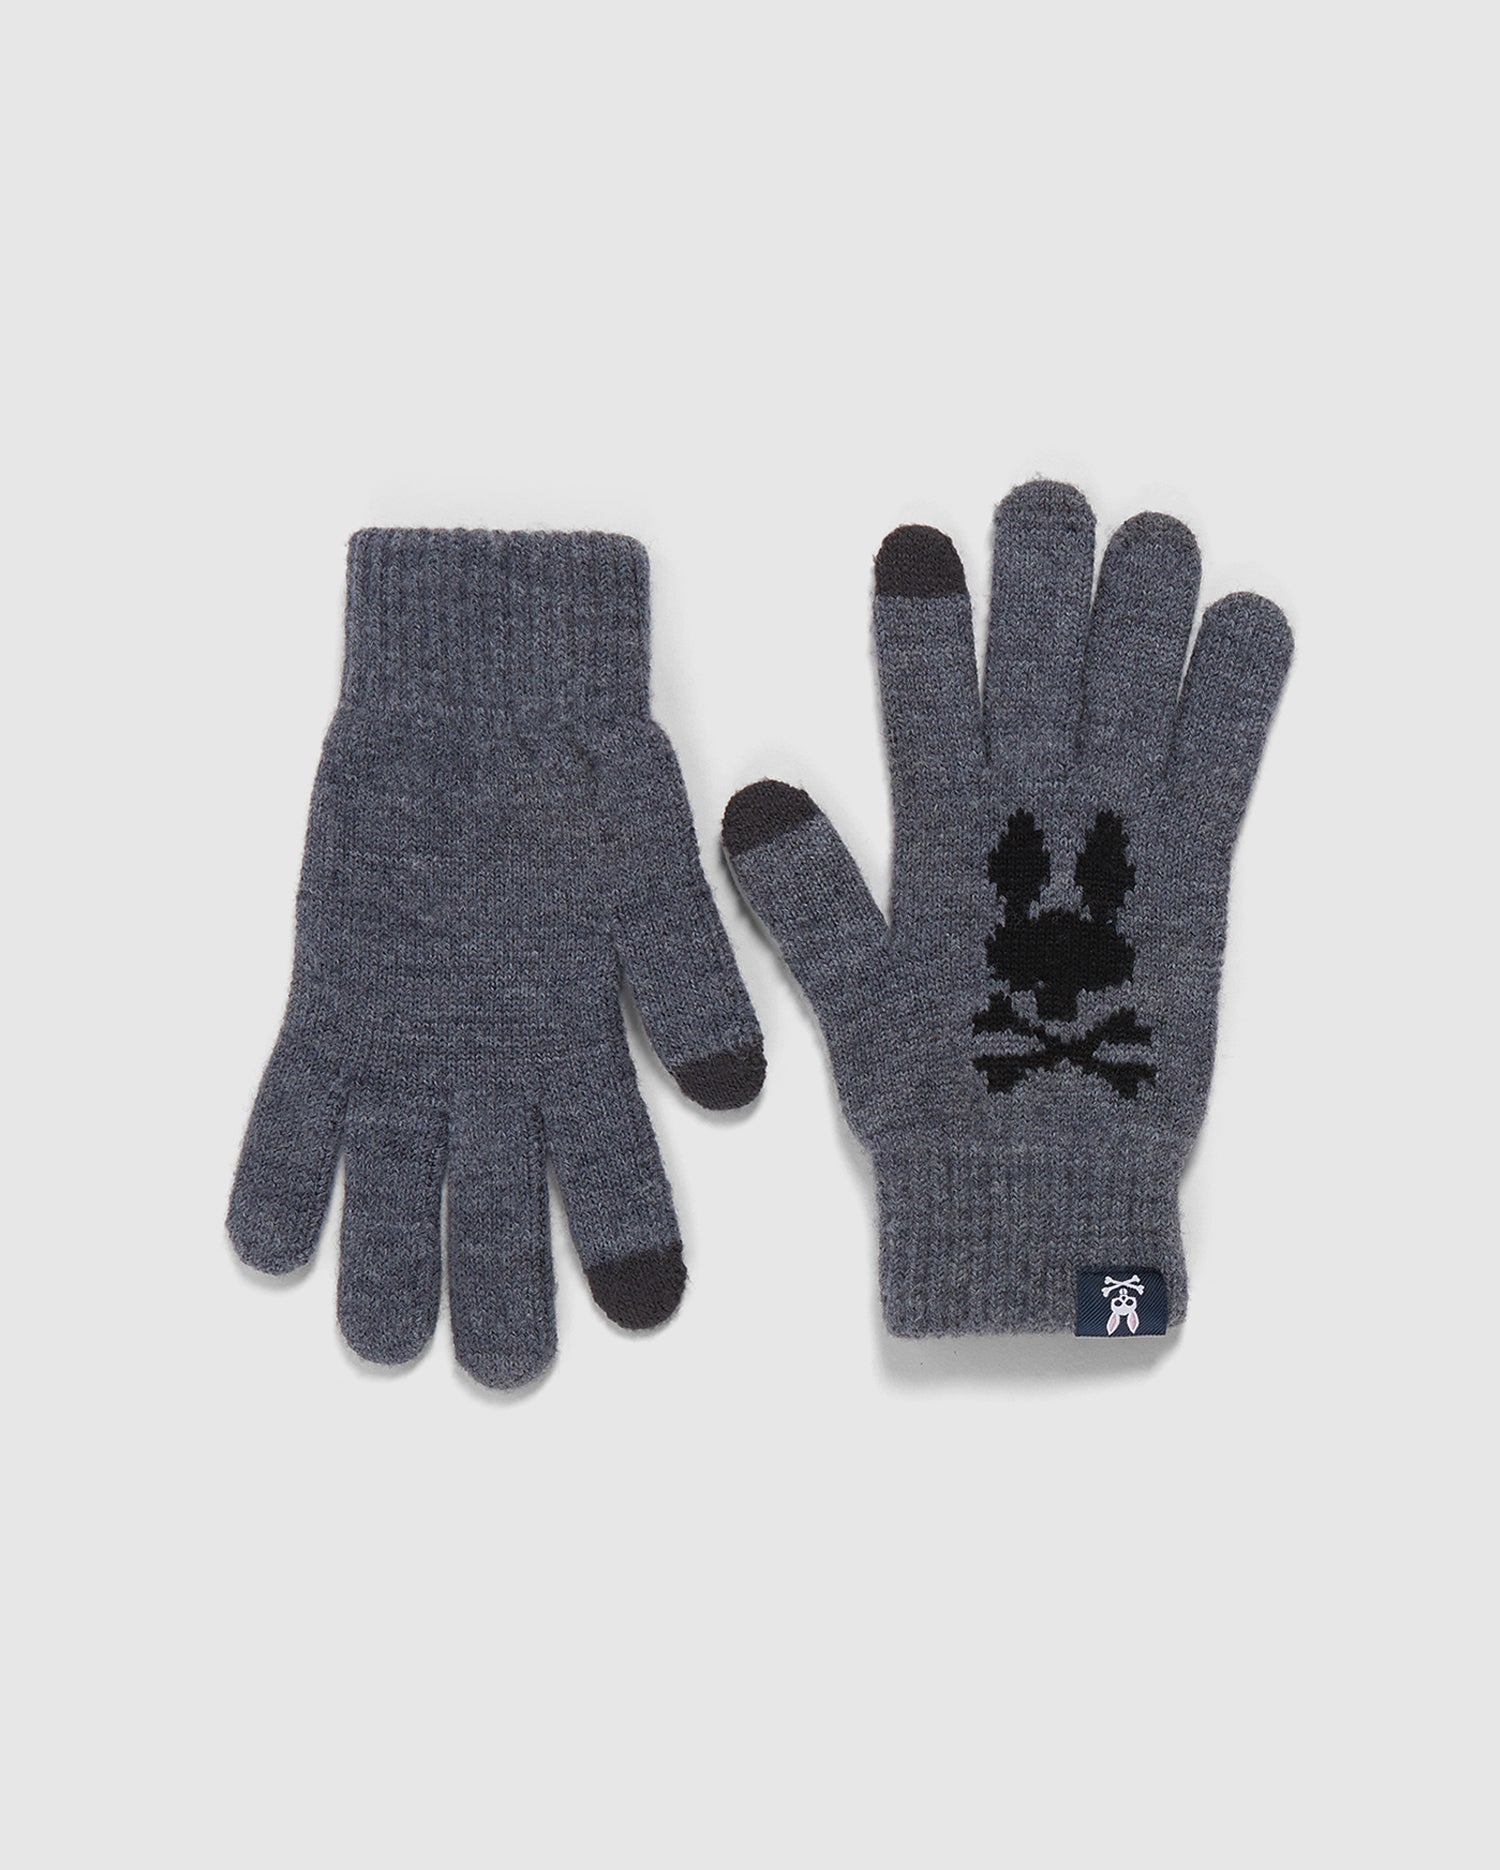 MENS WOOL B6A998U1GL GREY FINGER WITH GLOVES TOUCH